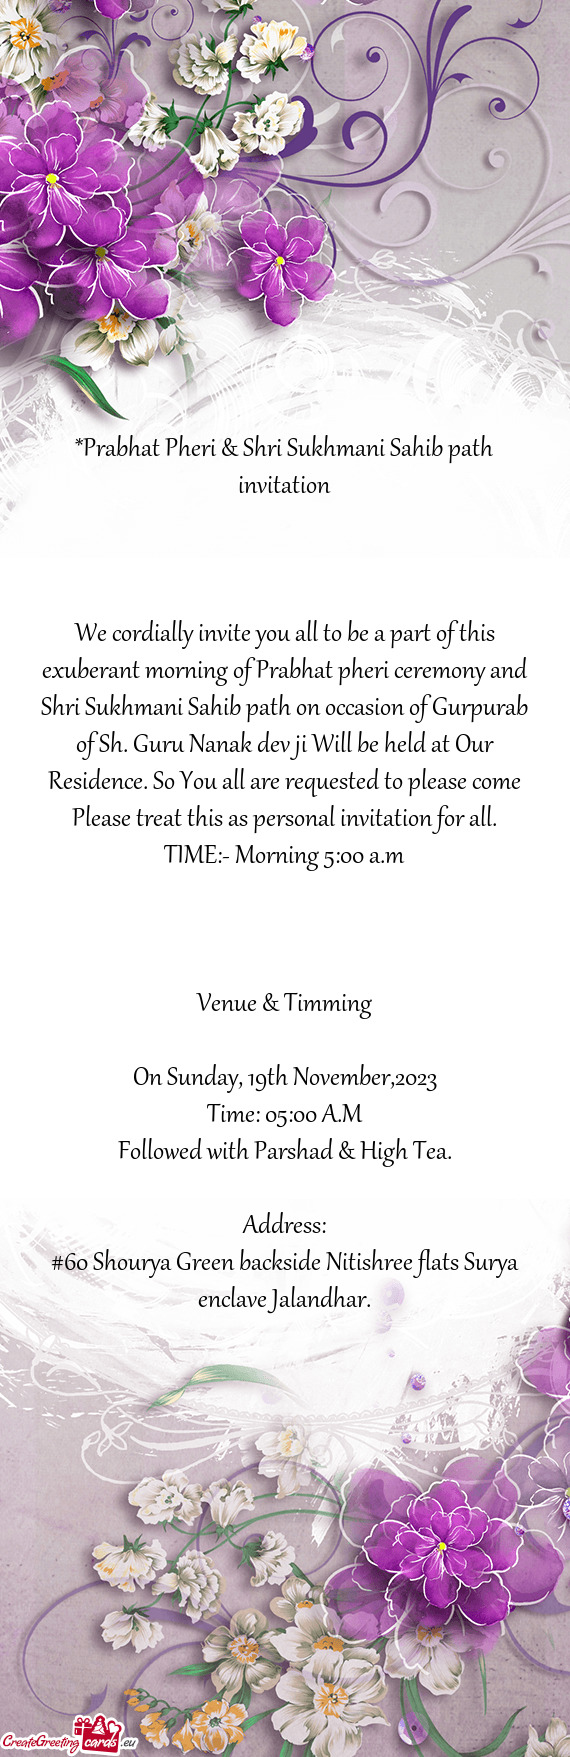 We cordially invite you all to be a part of this exuberant morning of Prabhat pheri ceremony and Shr